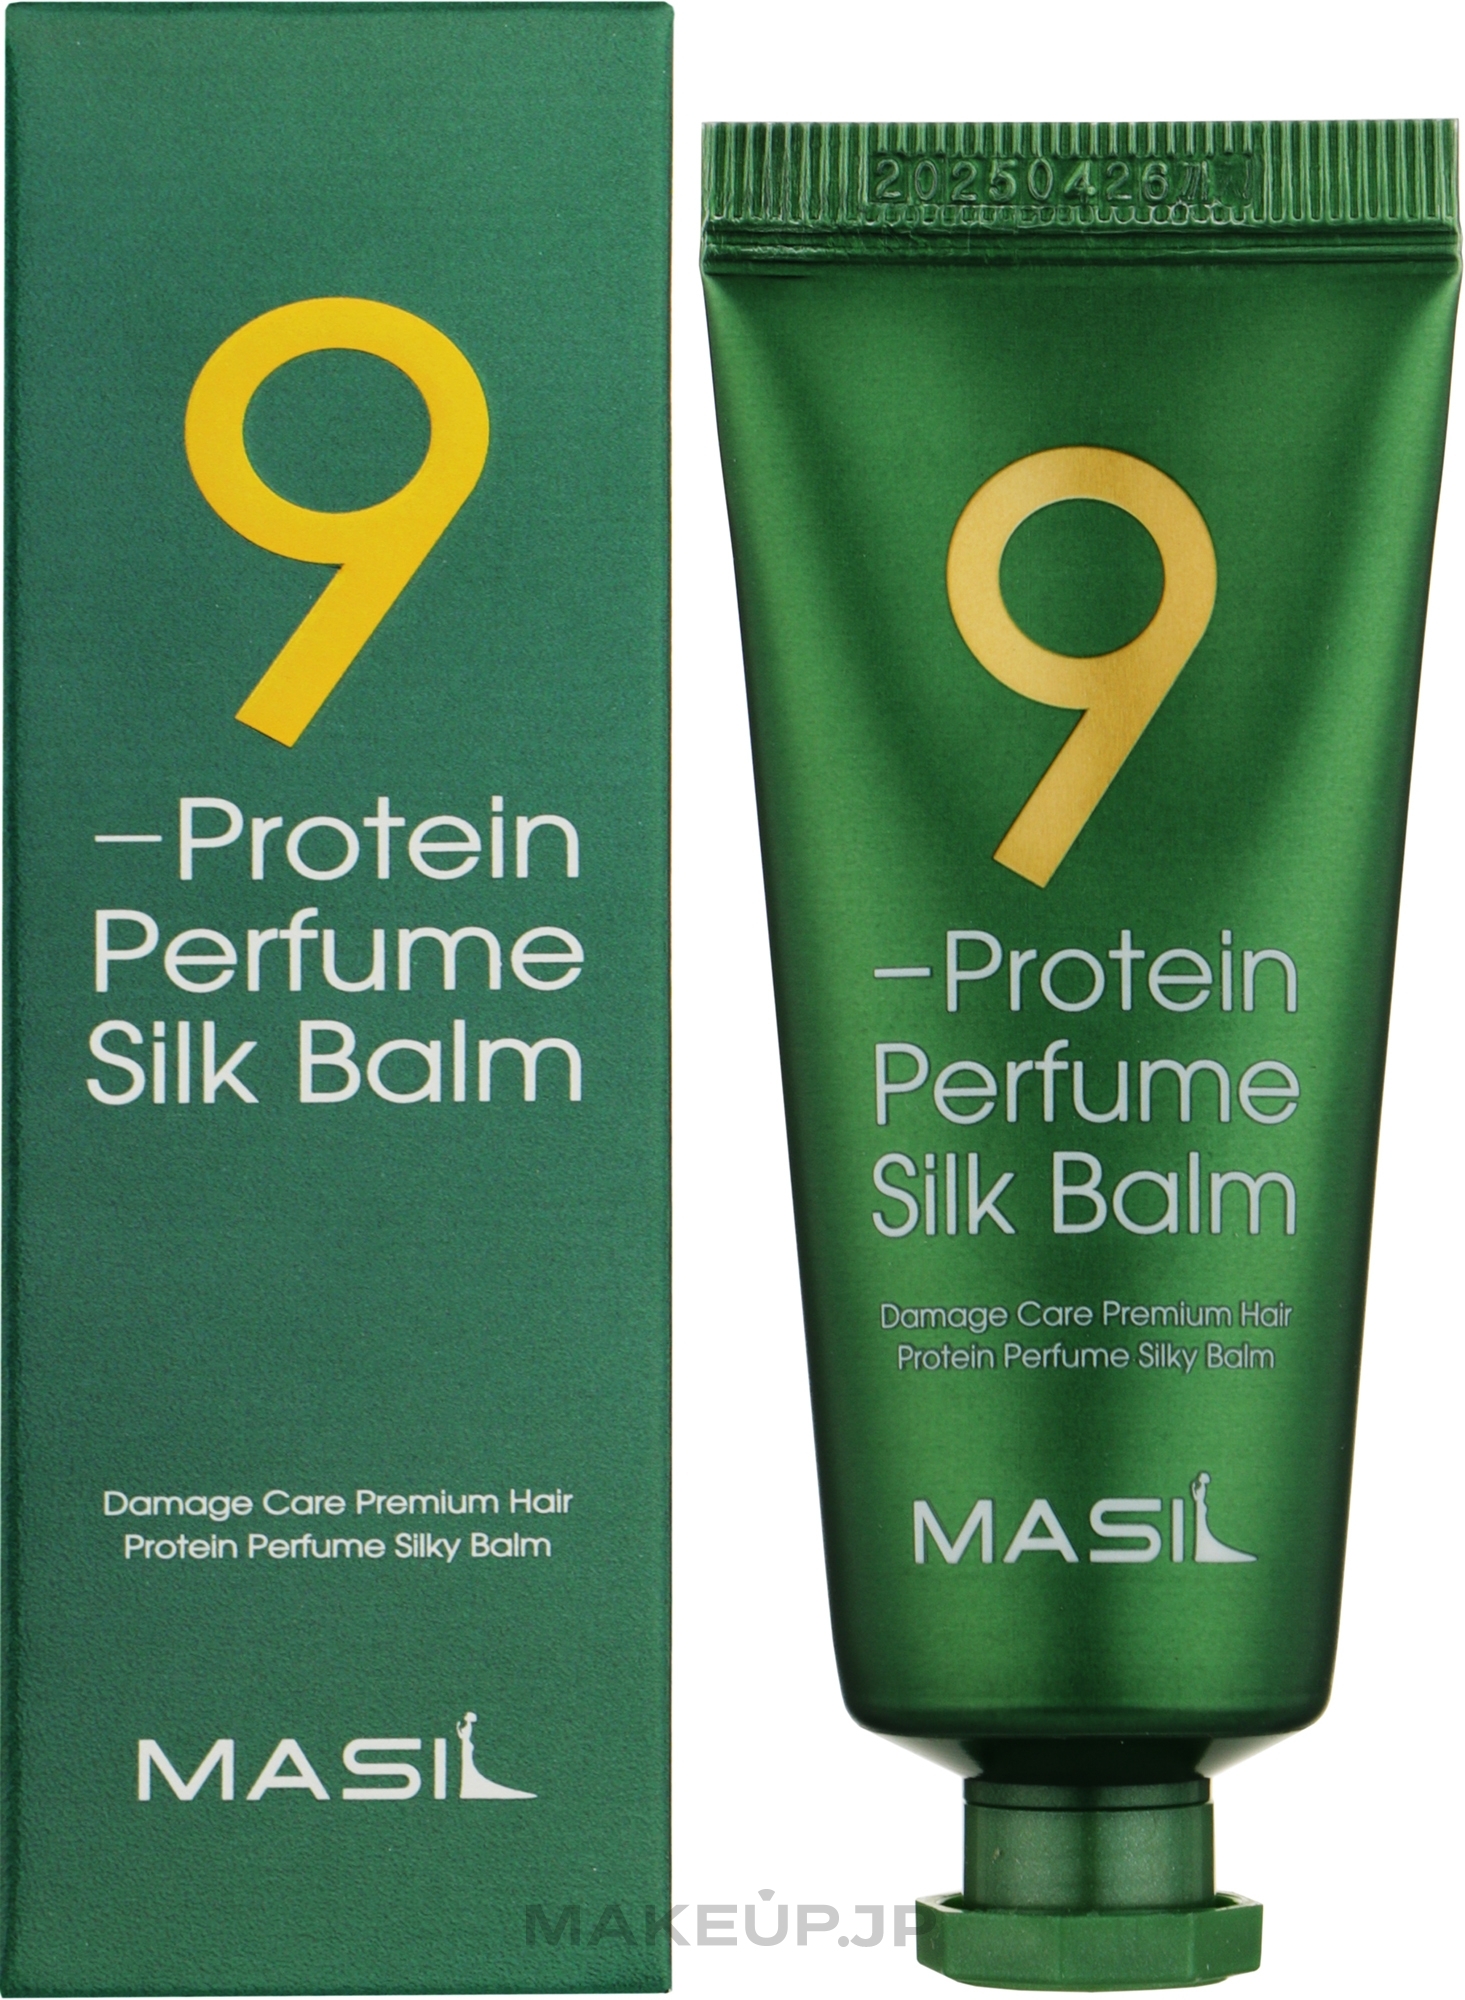 Leave-In Protein Conditioner for Damaged Hair - Masil 9 Protein Perfume Silk Balm — photo 20 ml